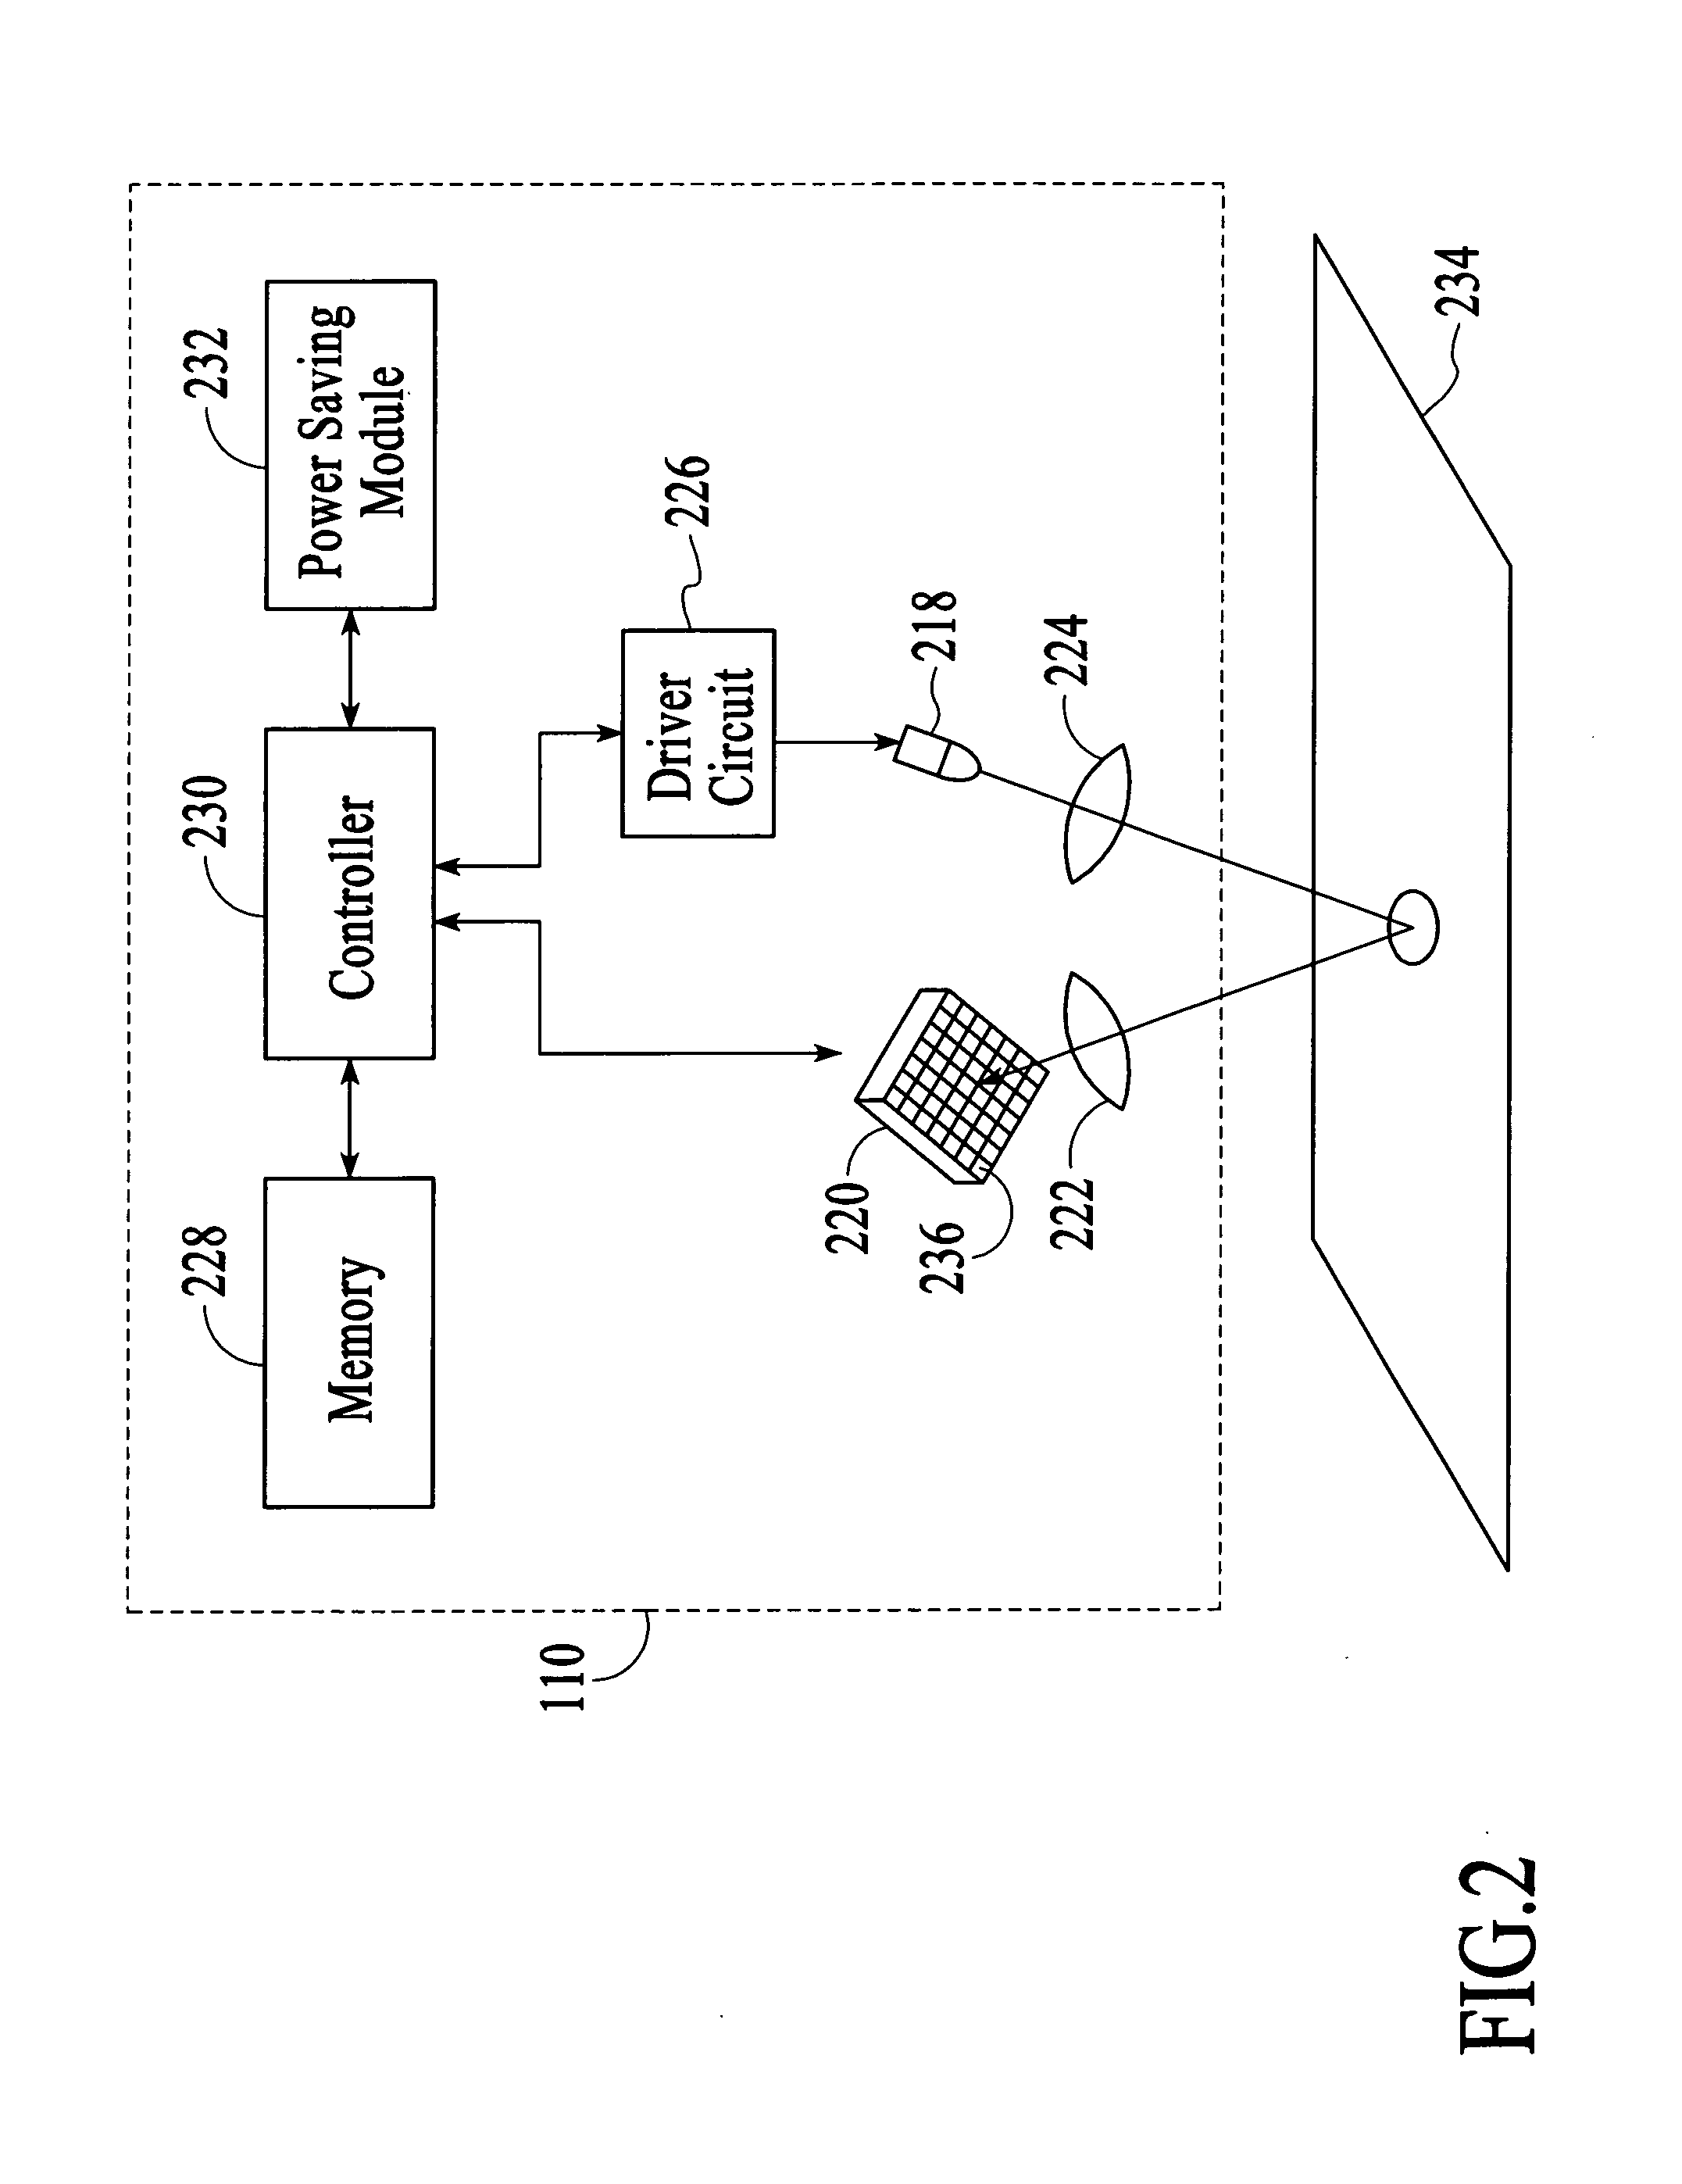 Optical navigation system and method for reducing the power consumption of the system